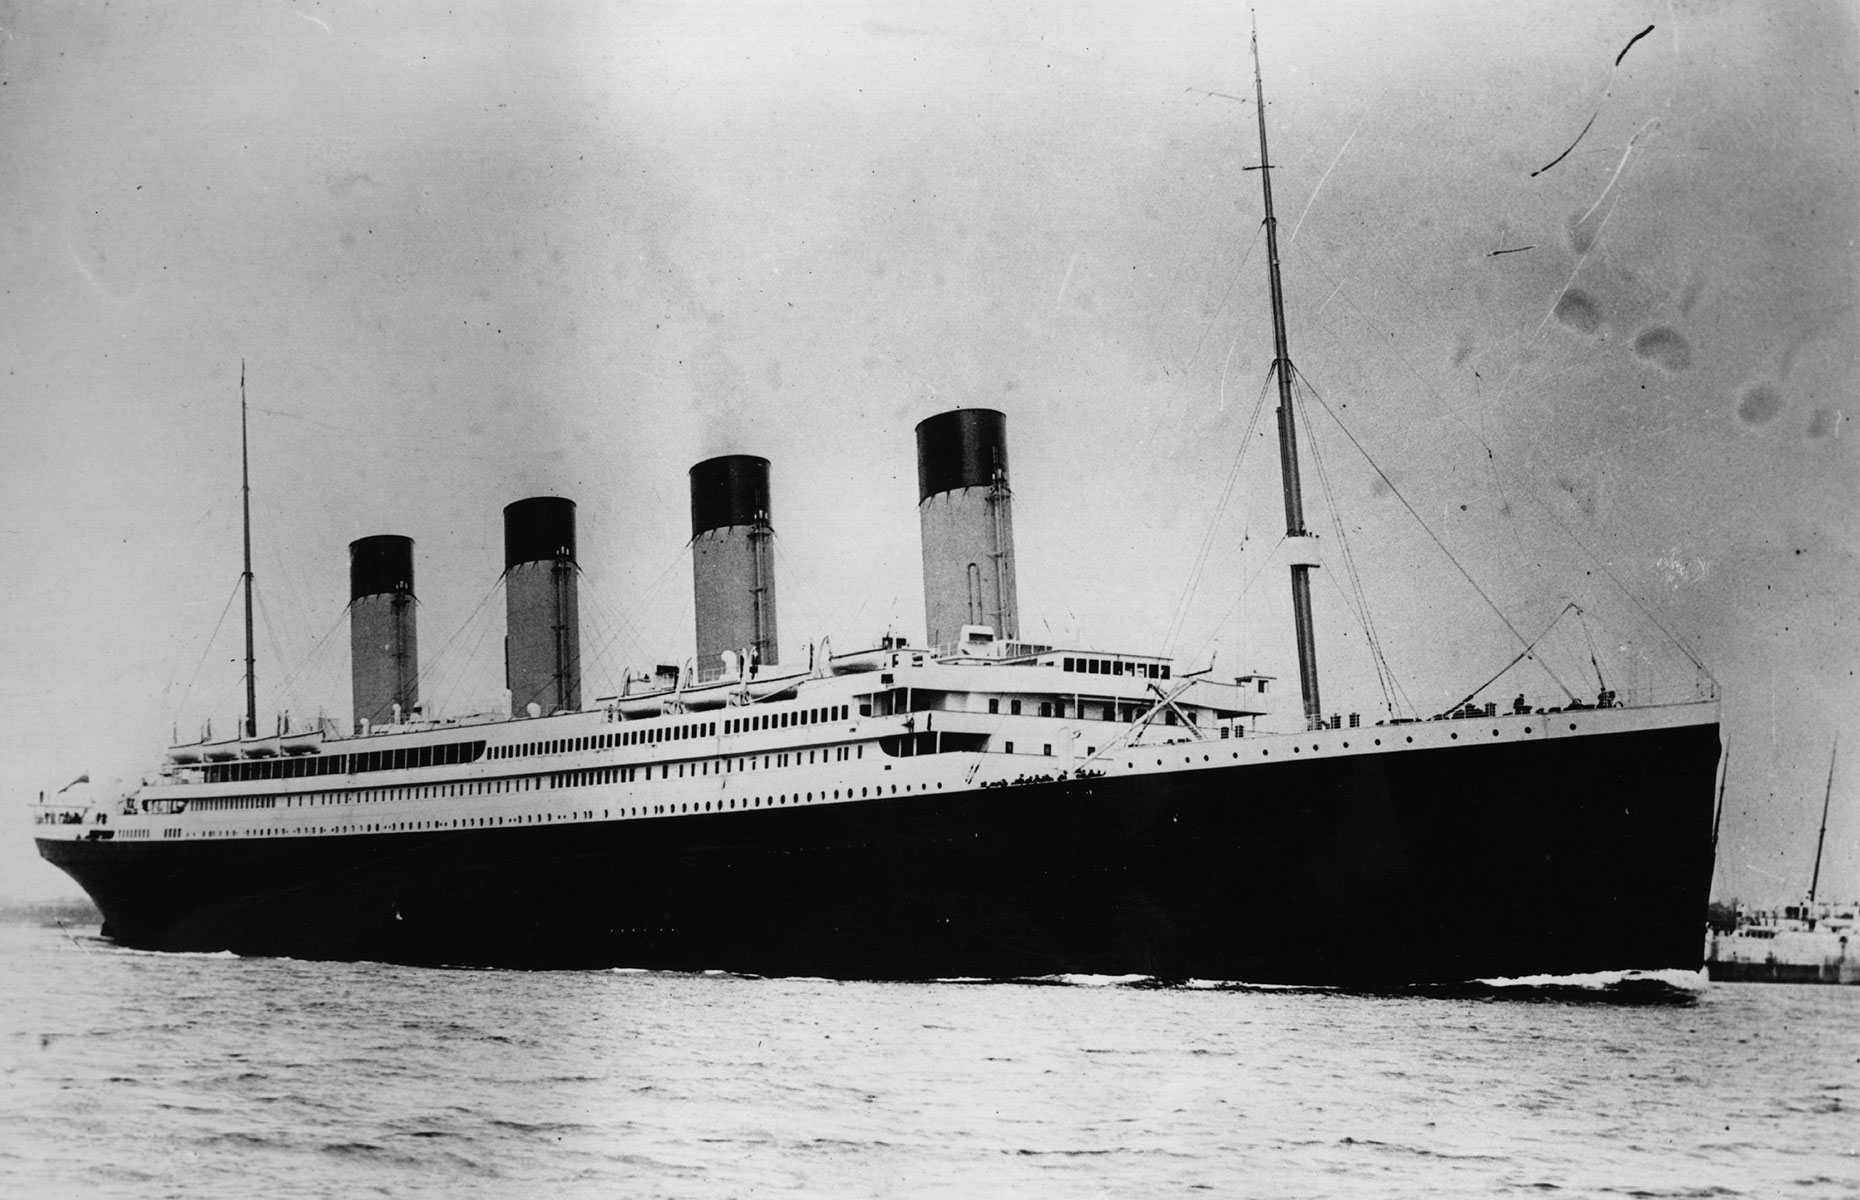 I discovered the Titanic on a top-secret military operation 